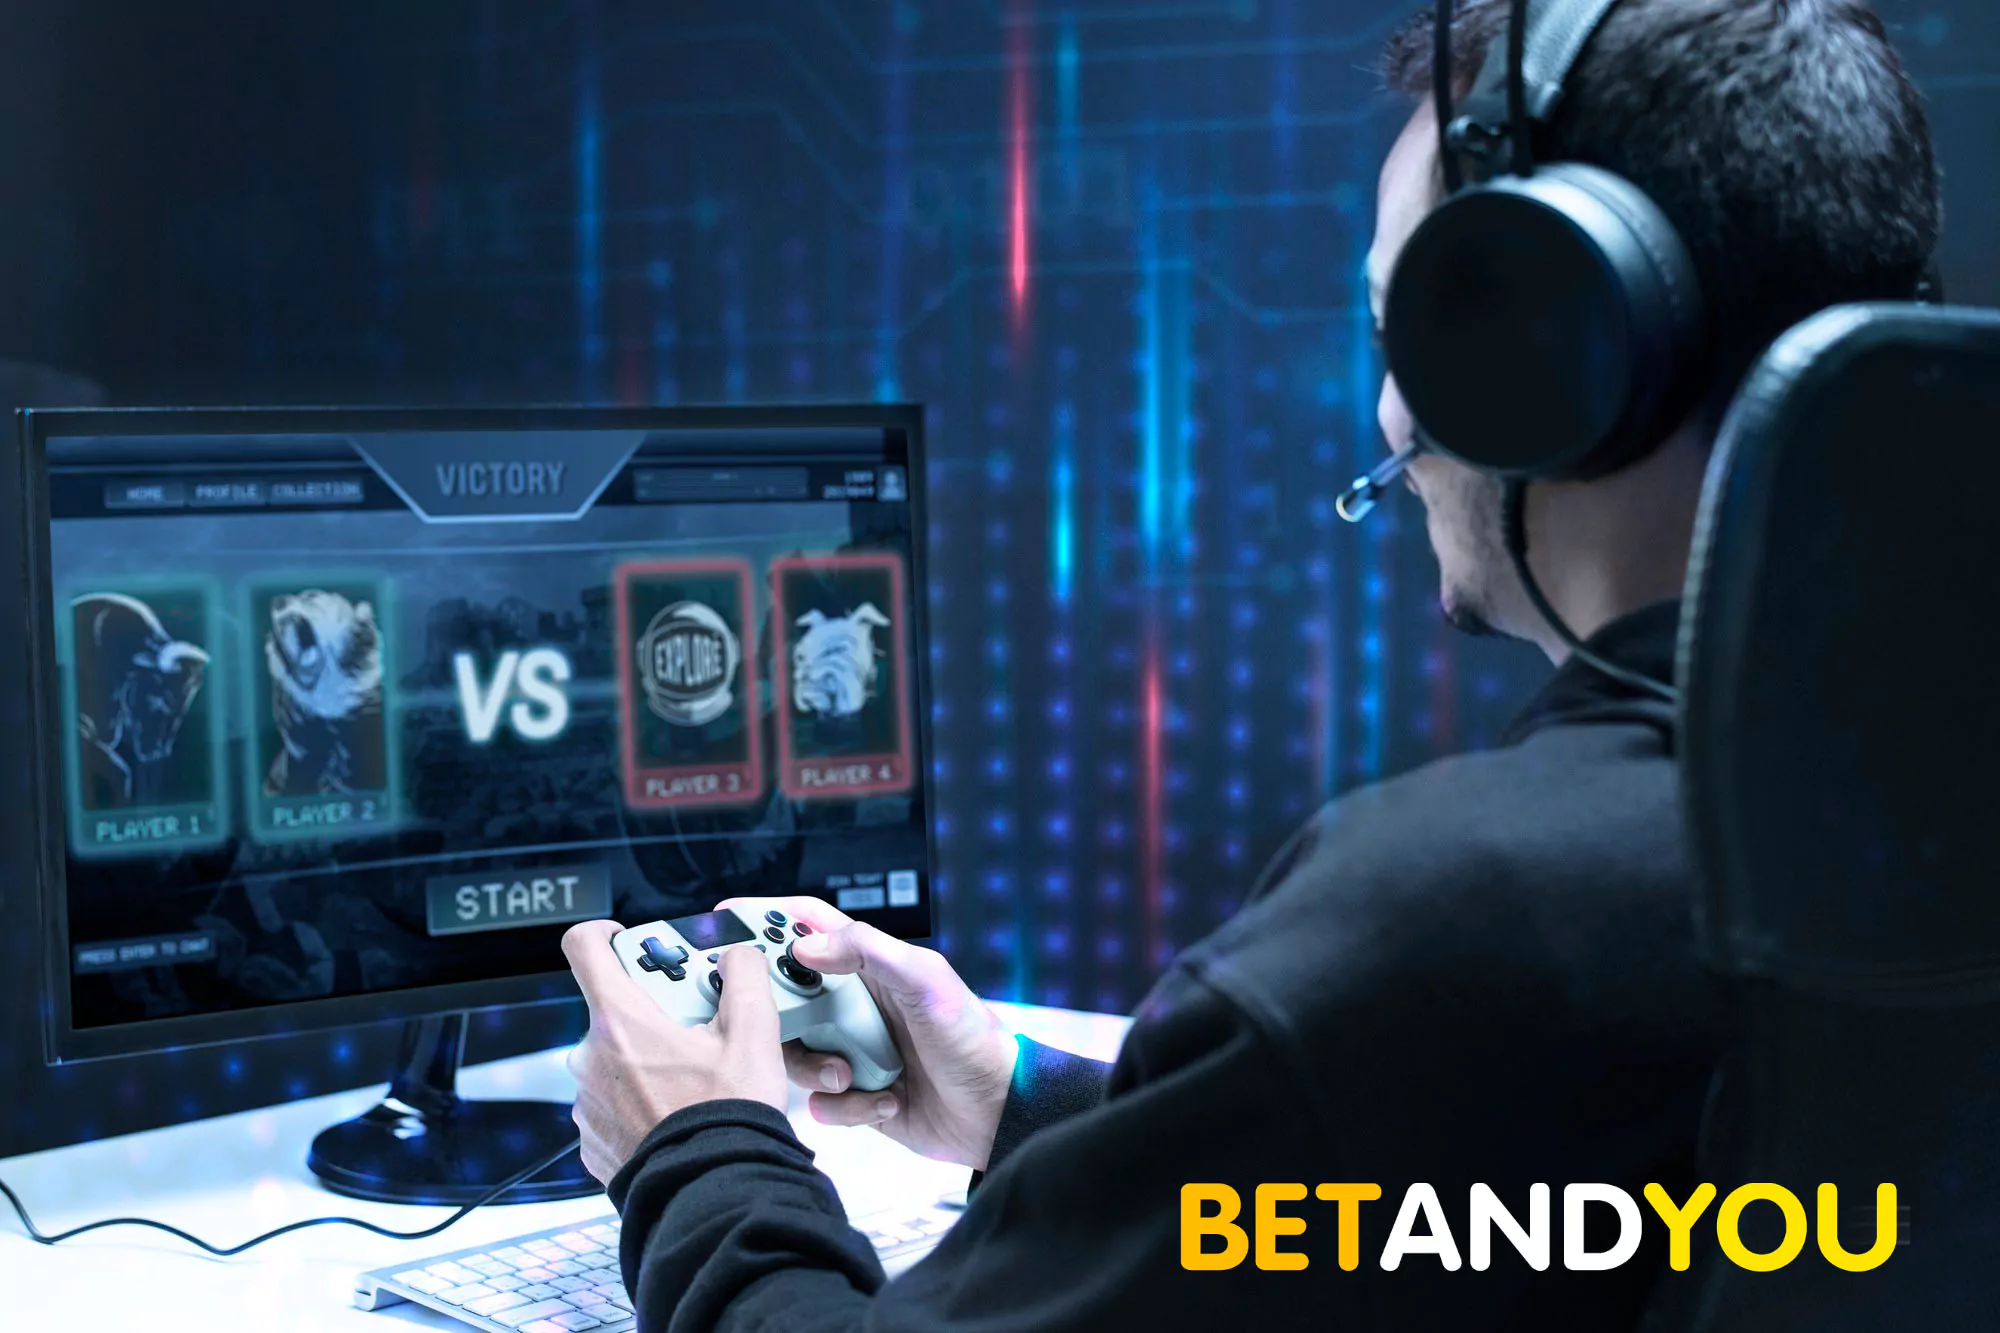 Place bets on your favorite cybersports teams at BetAndYou.